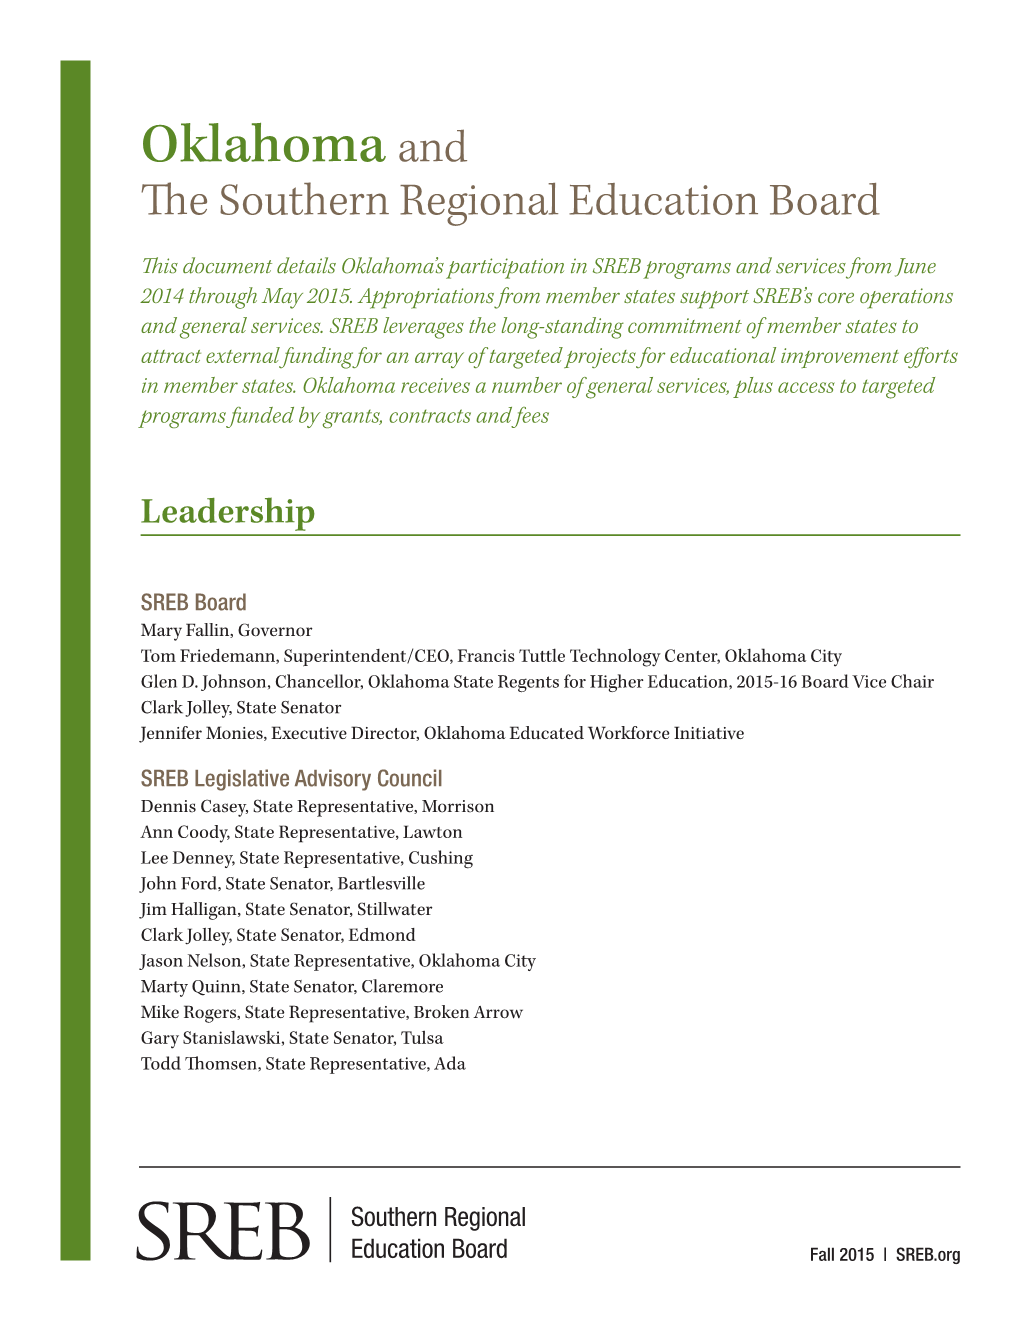 Oklahoma and the Southern Regional Education Board